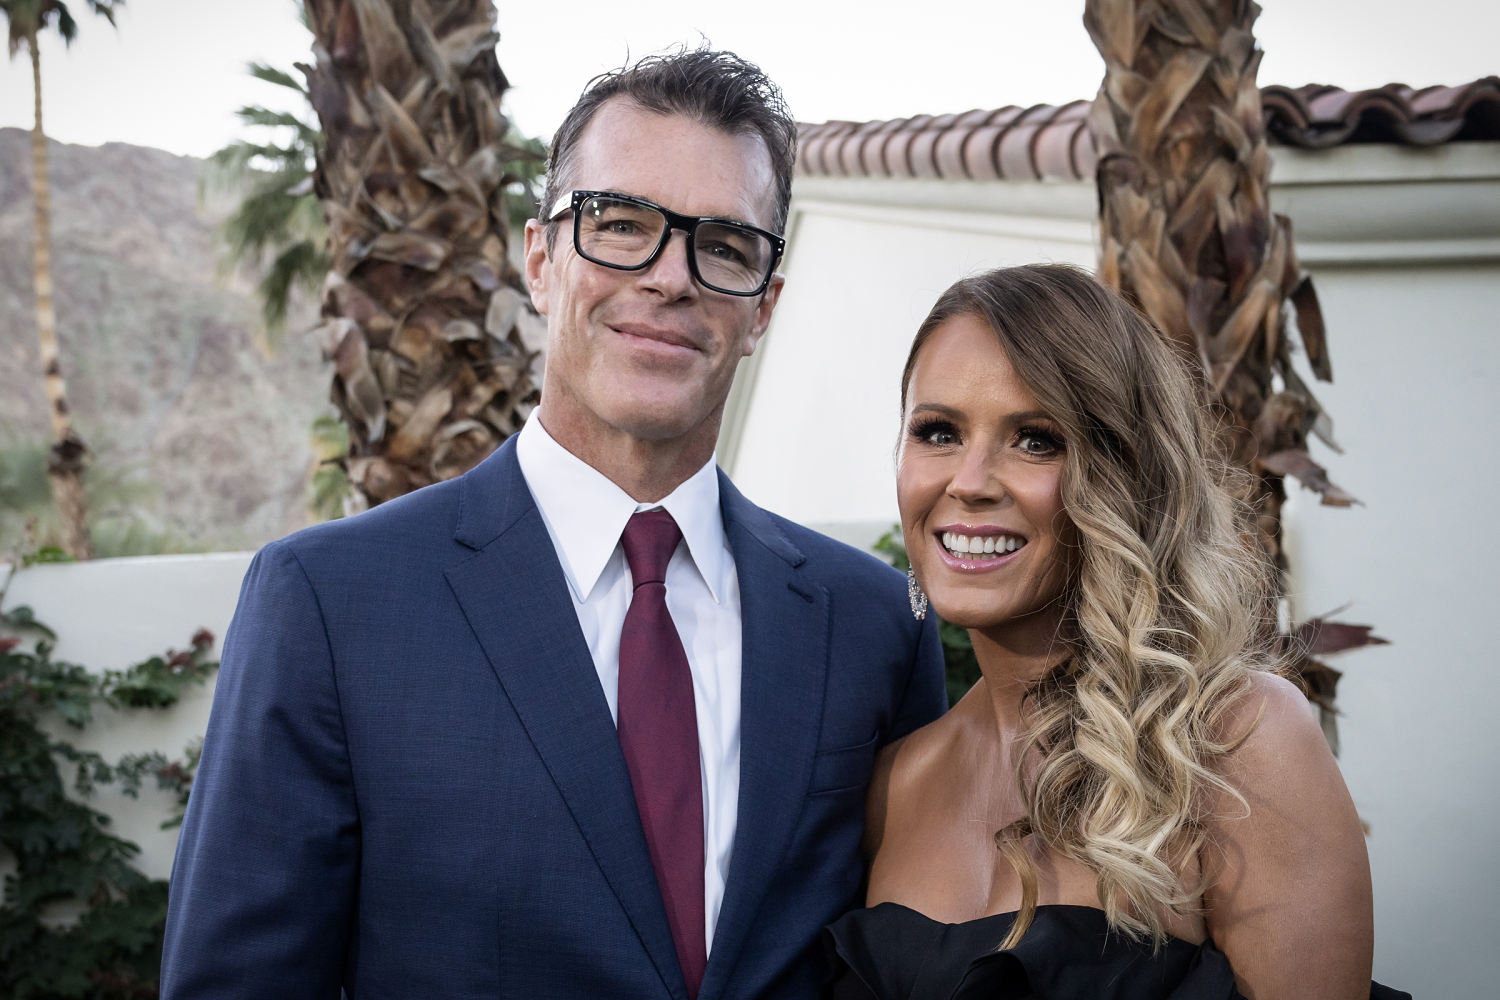 Ryan Sutter clarifies his cryptic Mother’s Day post about wife Trista: ‘She is searching a bit’